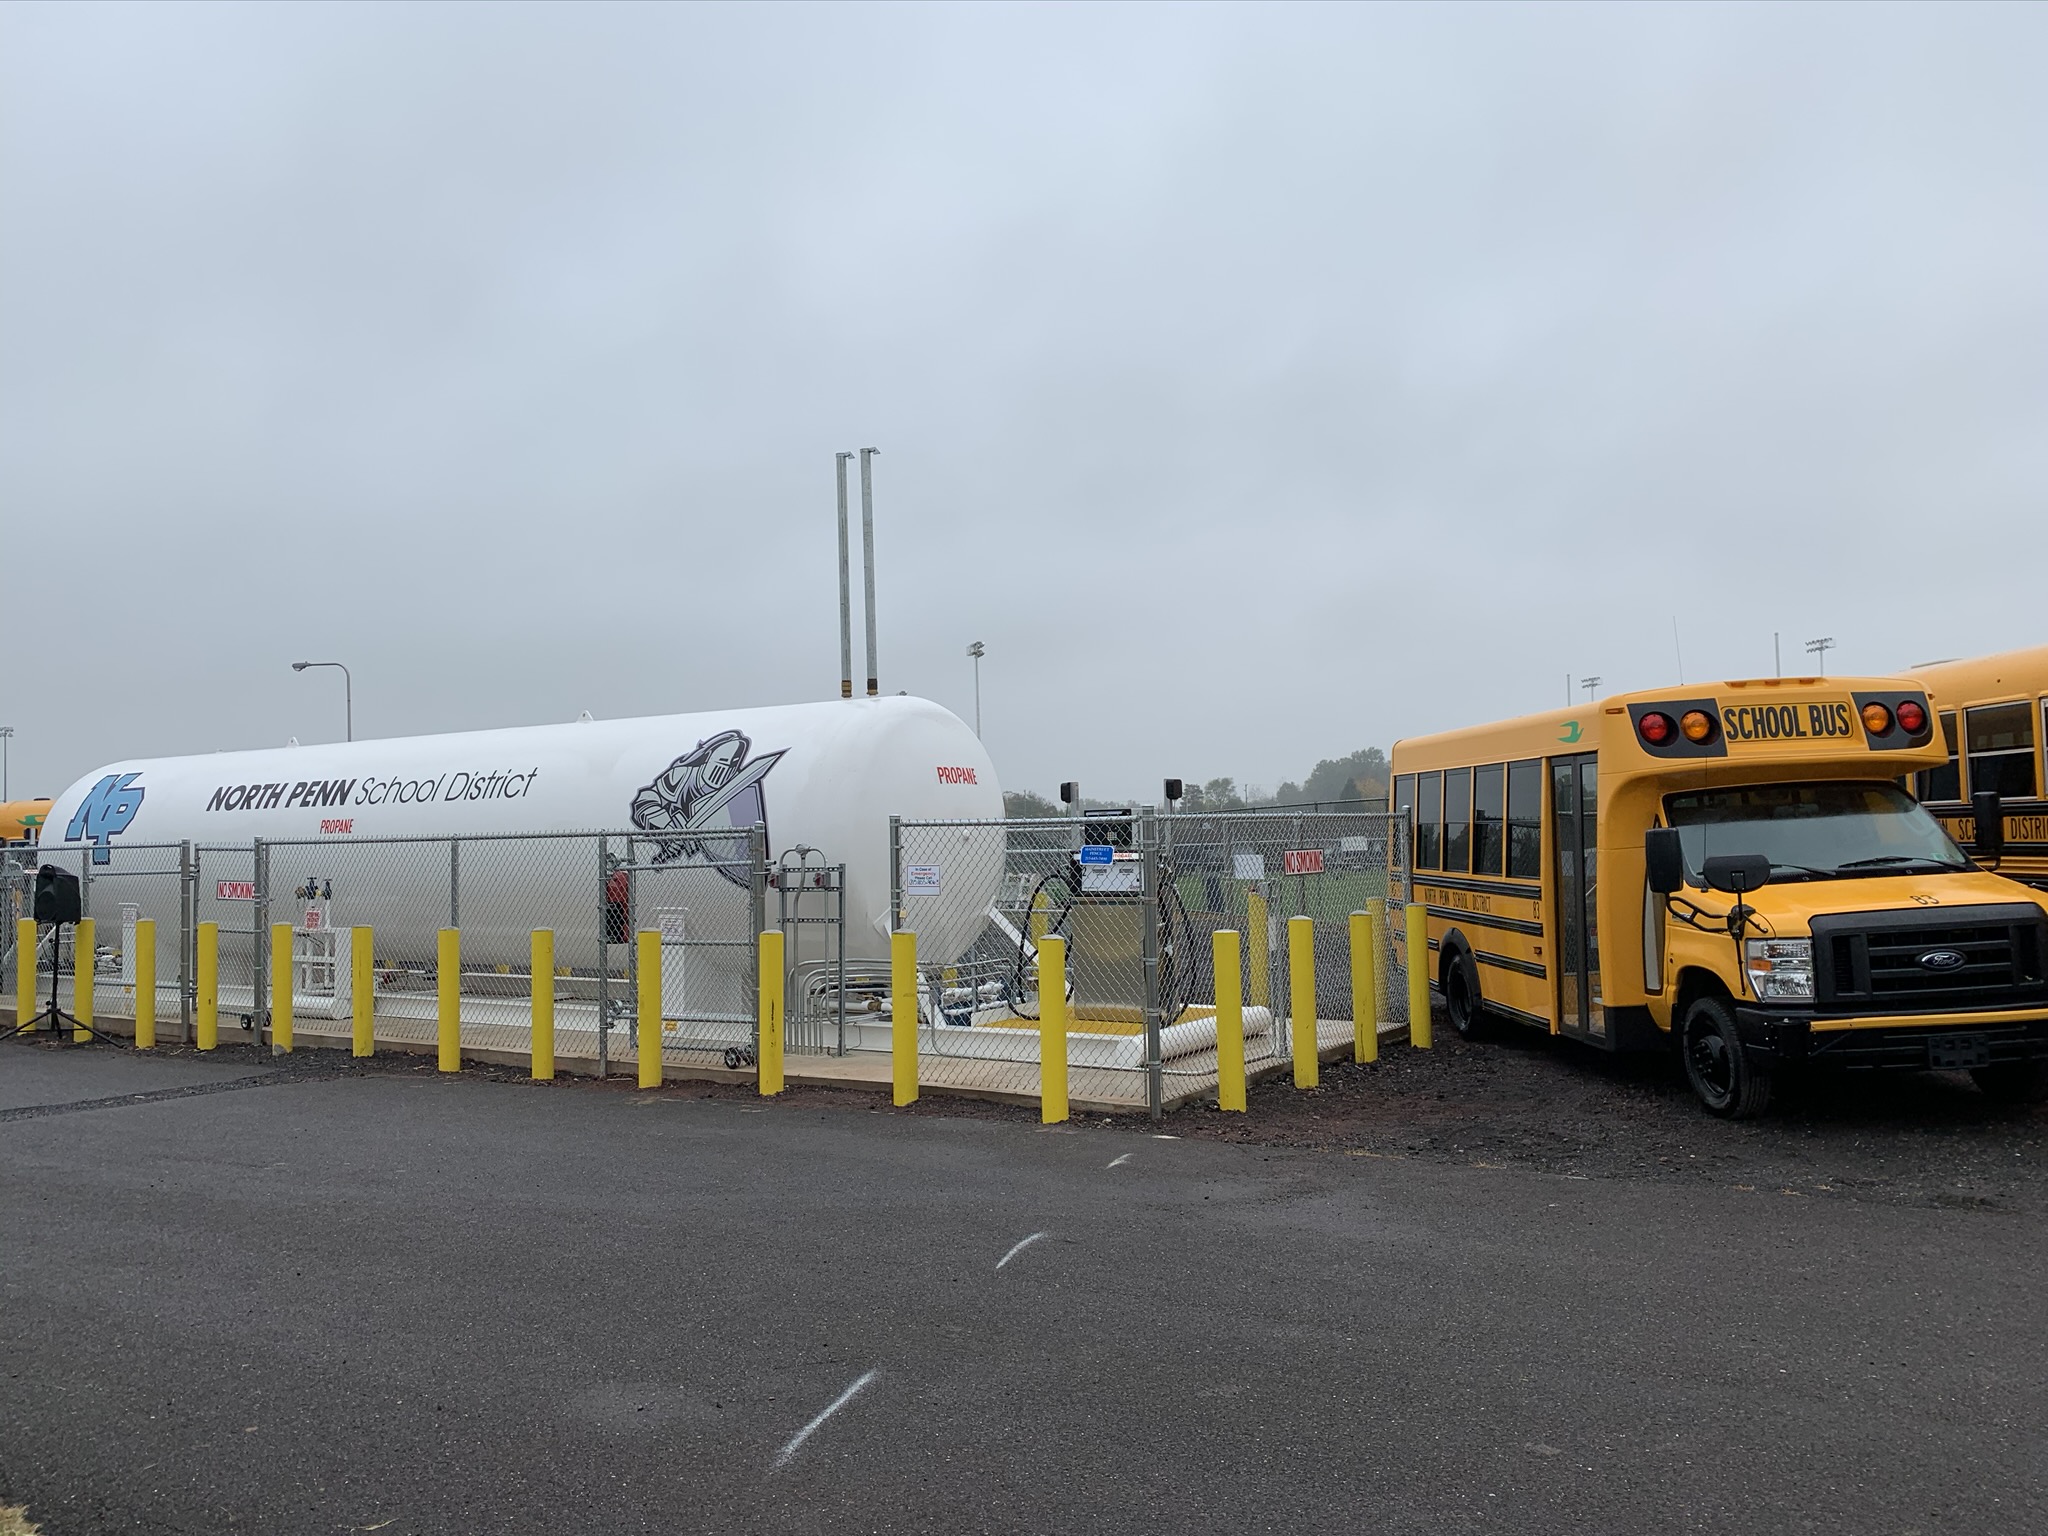 North Penn School District currently pays 97 cents per gallon for propane compared with $2.04 for diesel. The district has a newly installed, onsite fuel station with 18,000-gallon tank capacity.